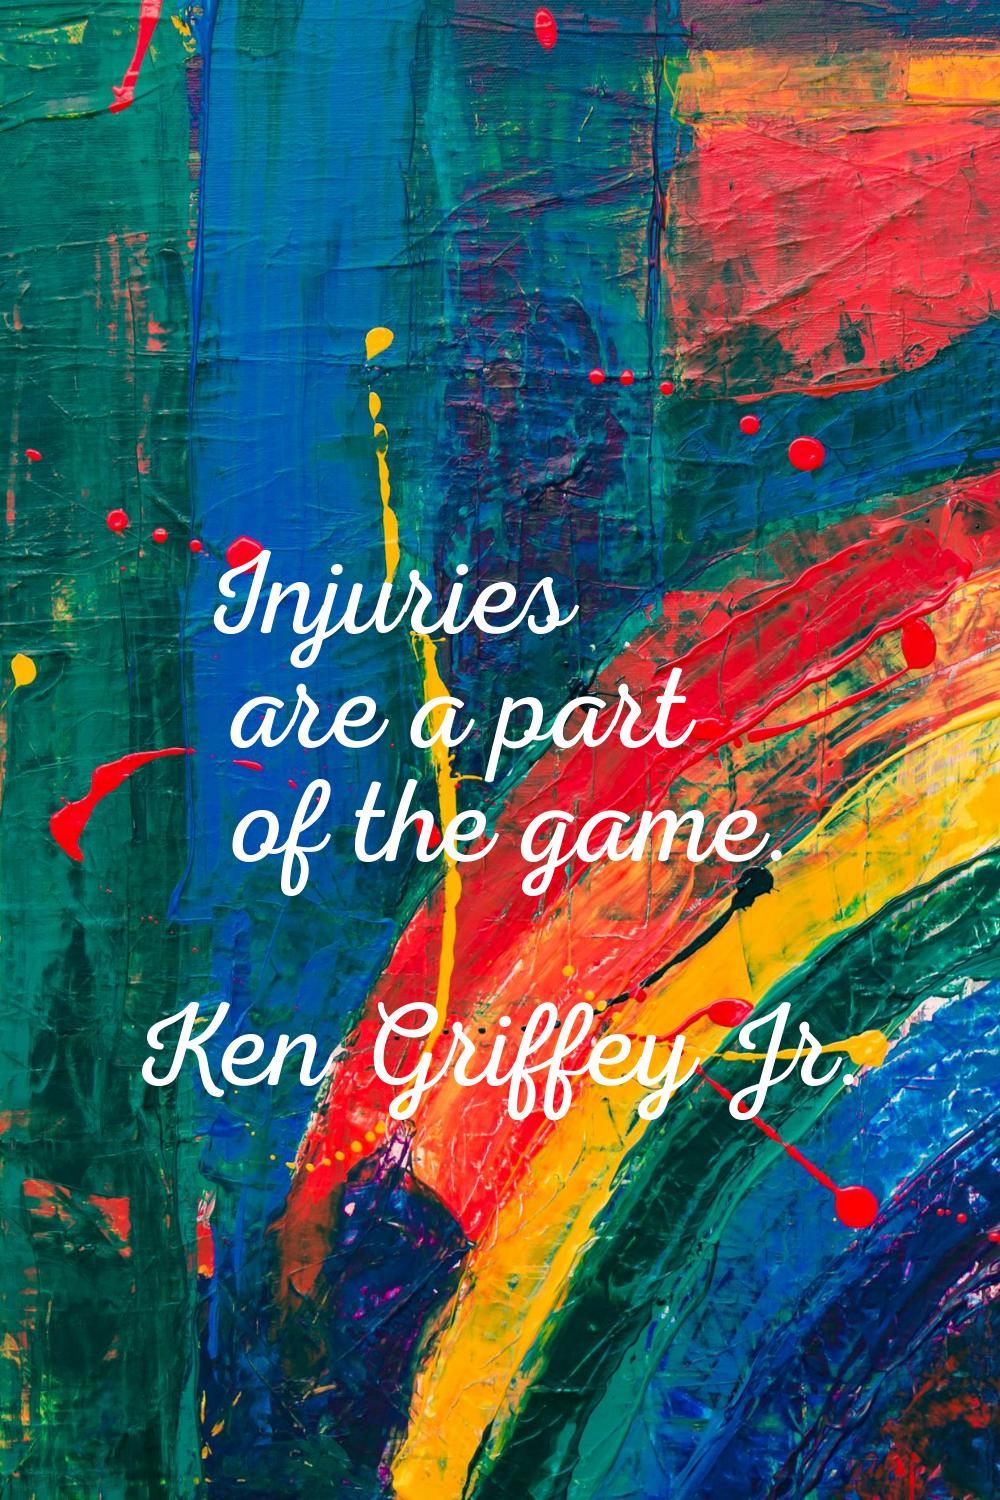 Injuries are a part of the game.